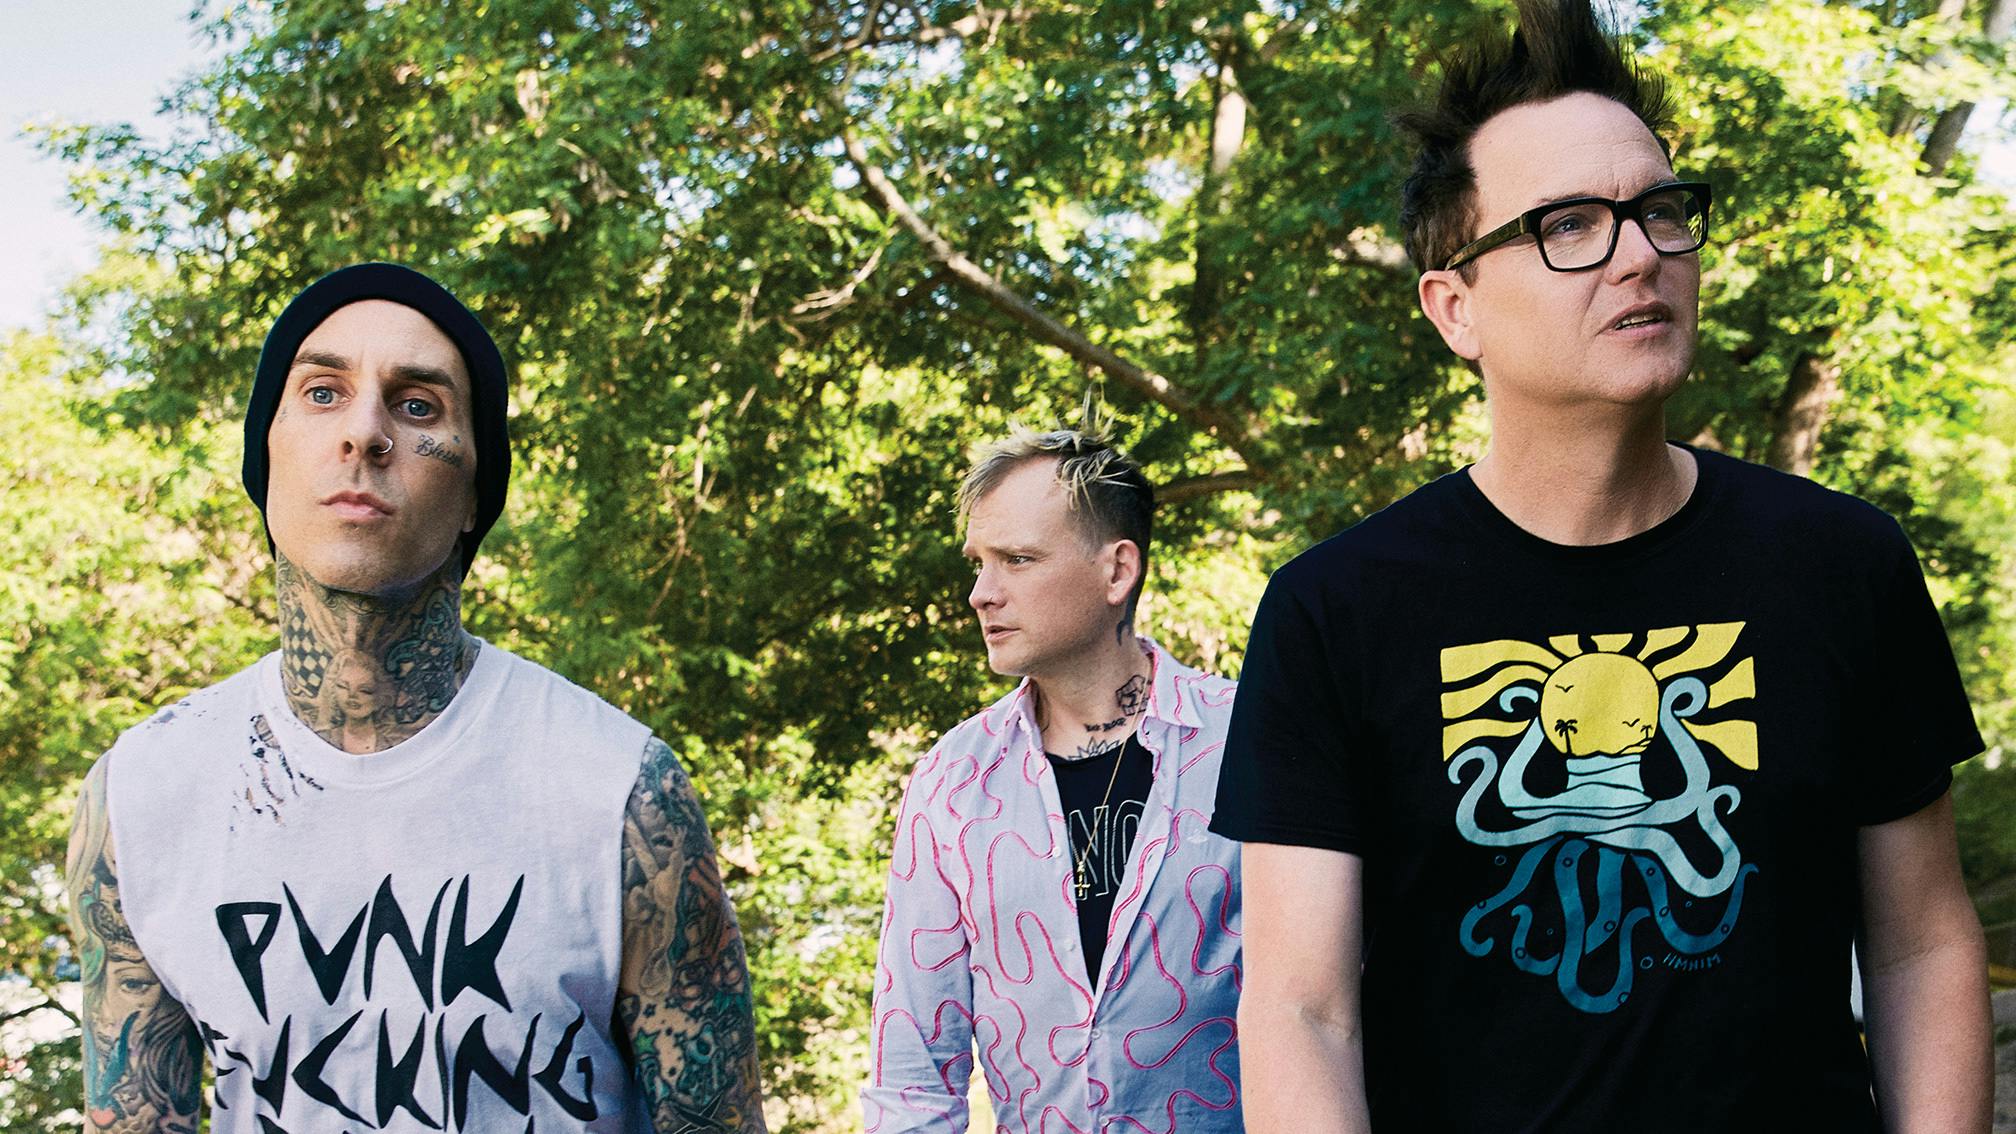 Travis Barker On Upcoming blink-182 Single Quarantine: "It’ll Be Like All Our Fan Favourites"